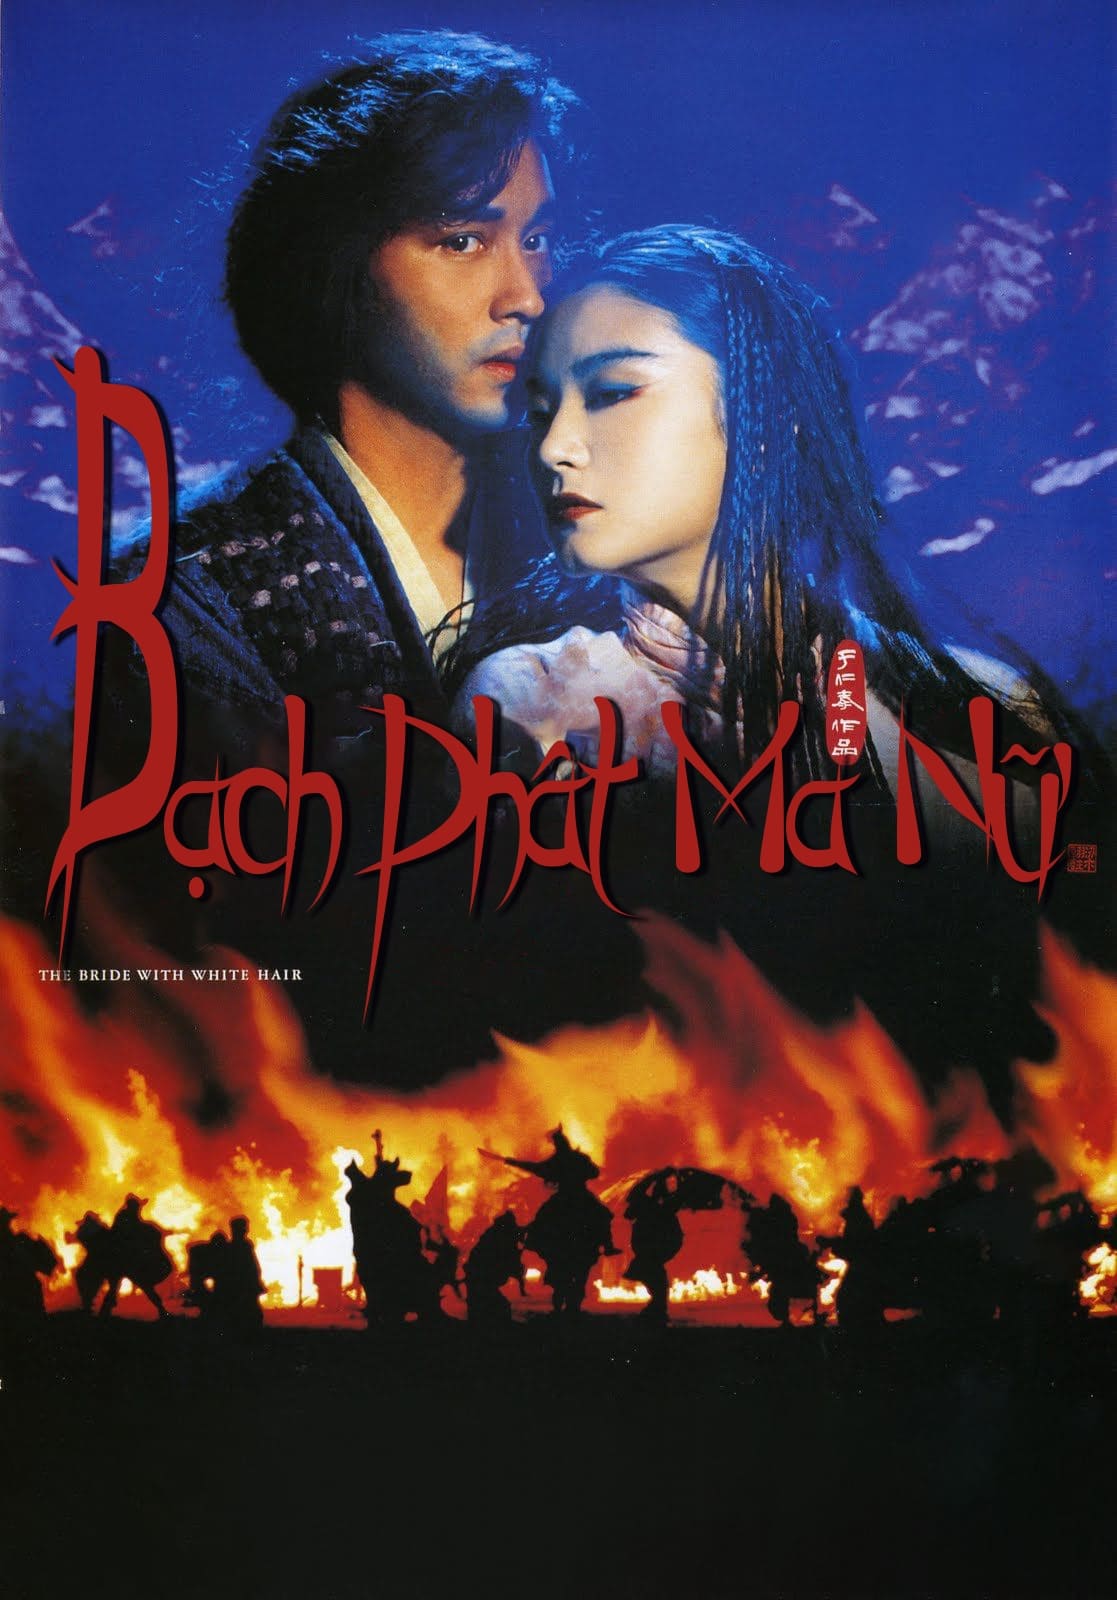 Bạch Phát Ma Nữ (The Bride With White Hair) [1993]